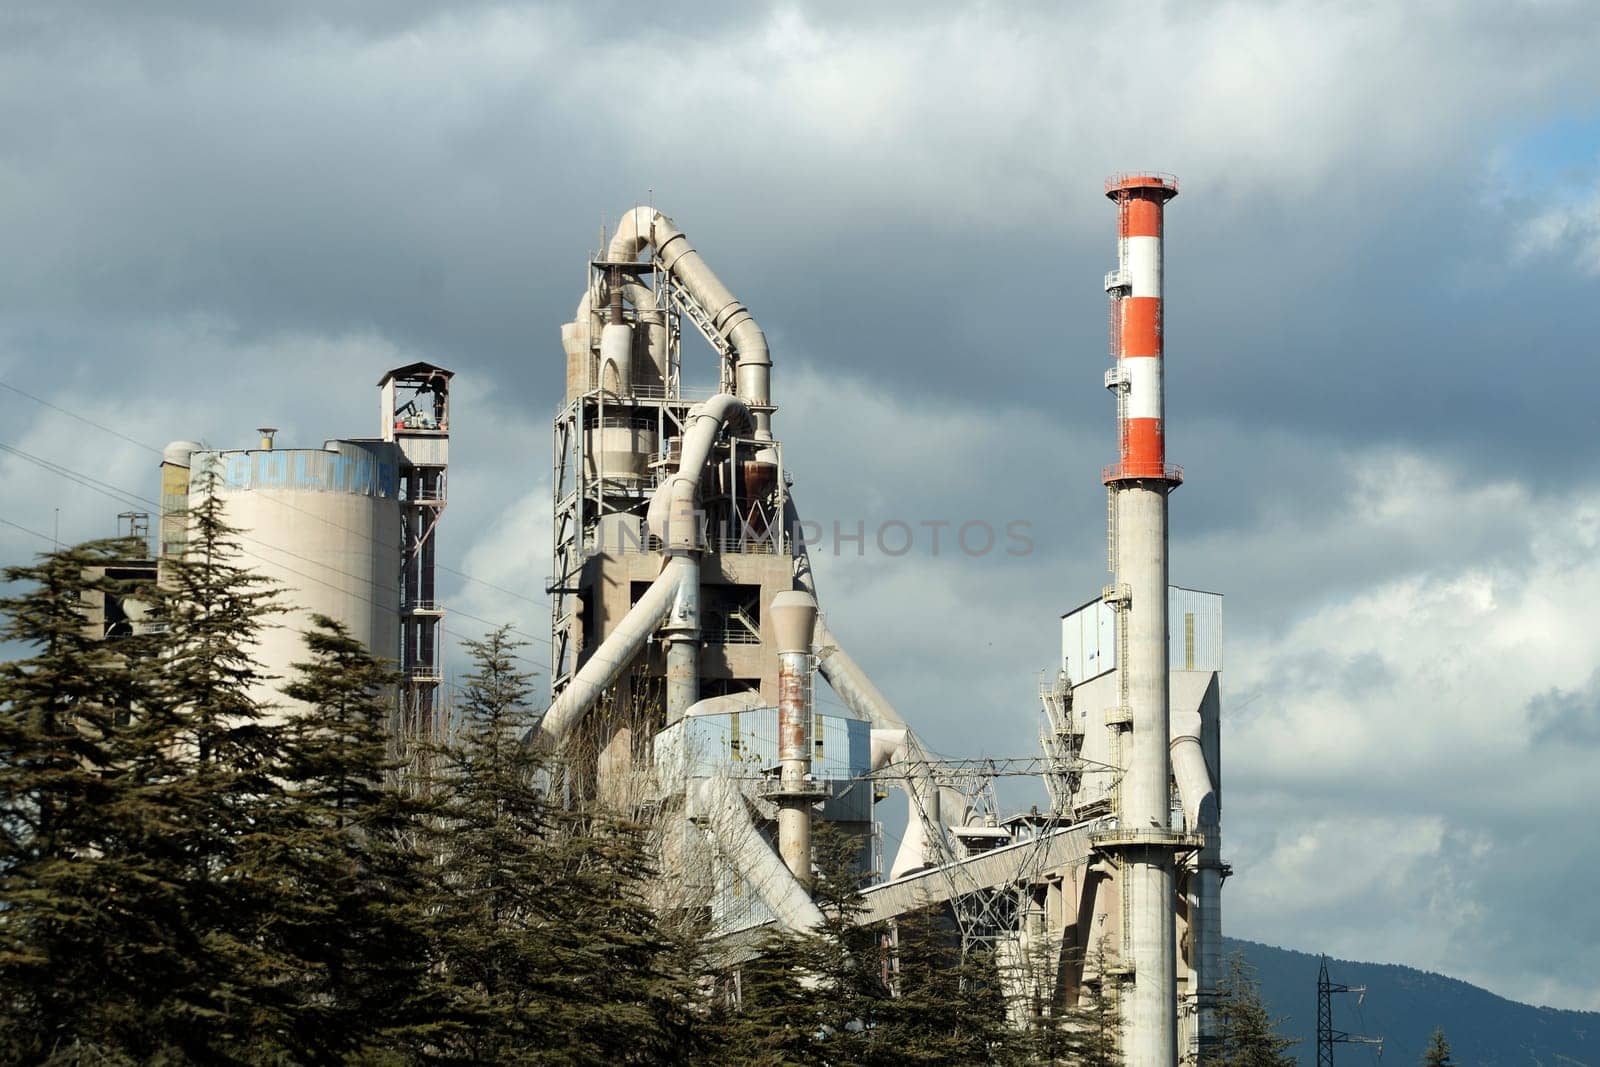 cement plant against the background of a cloudy sky close up